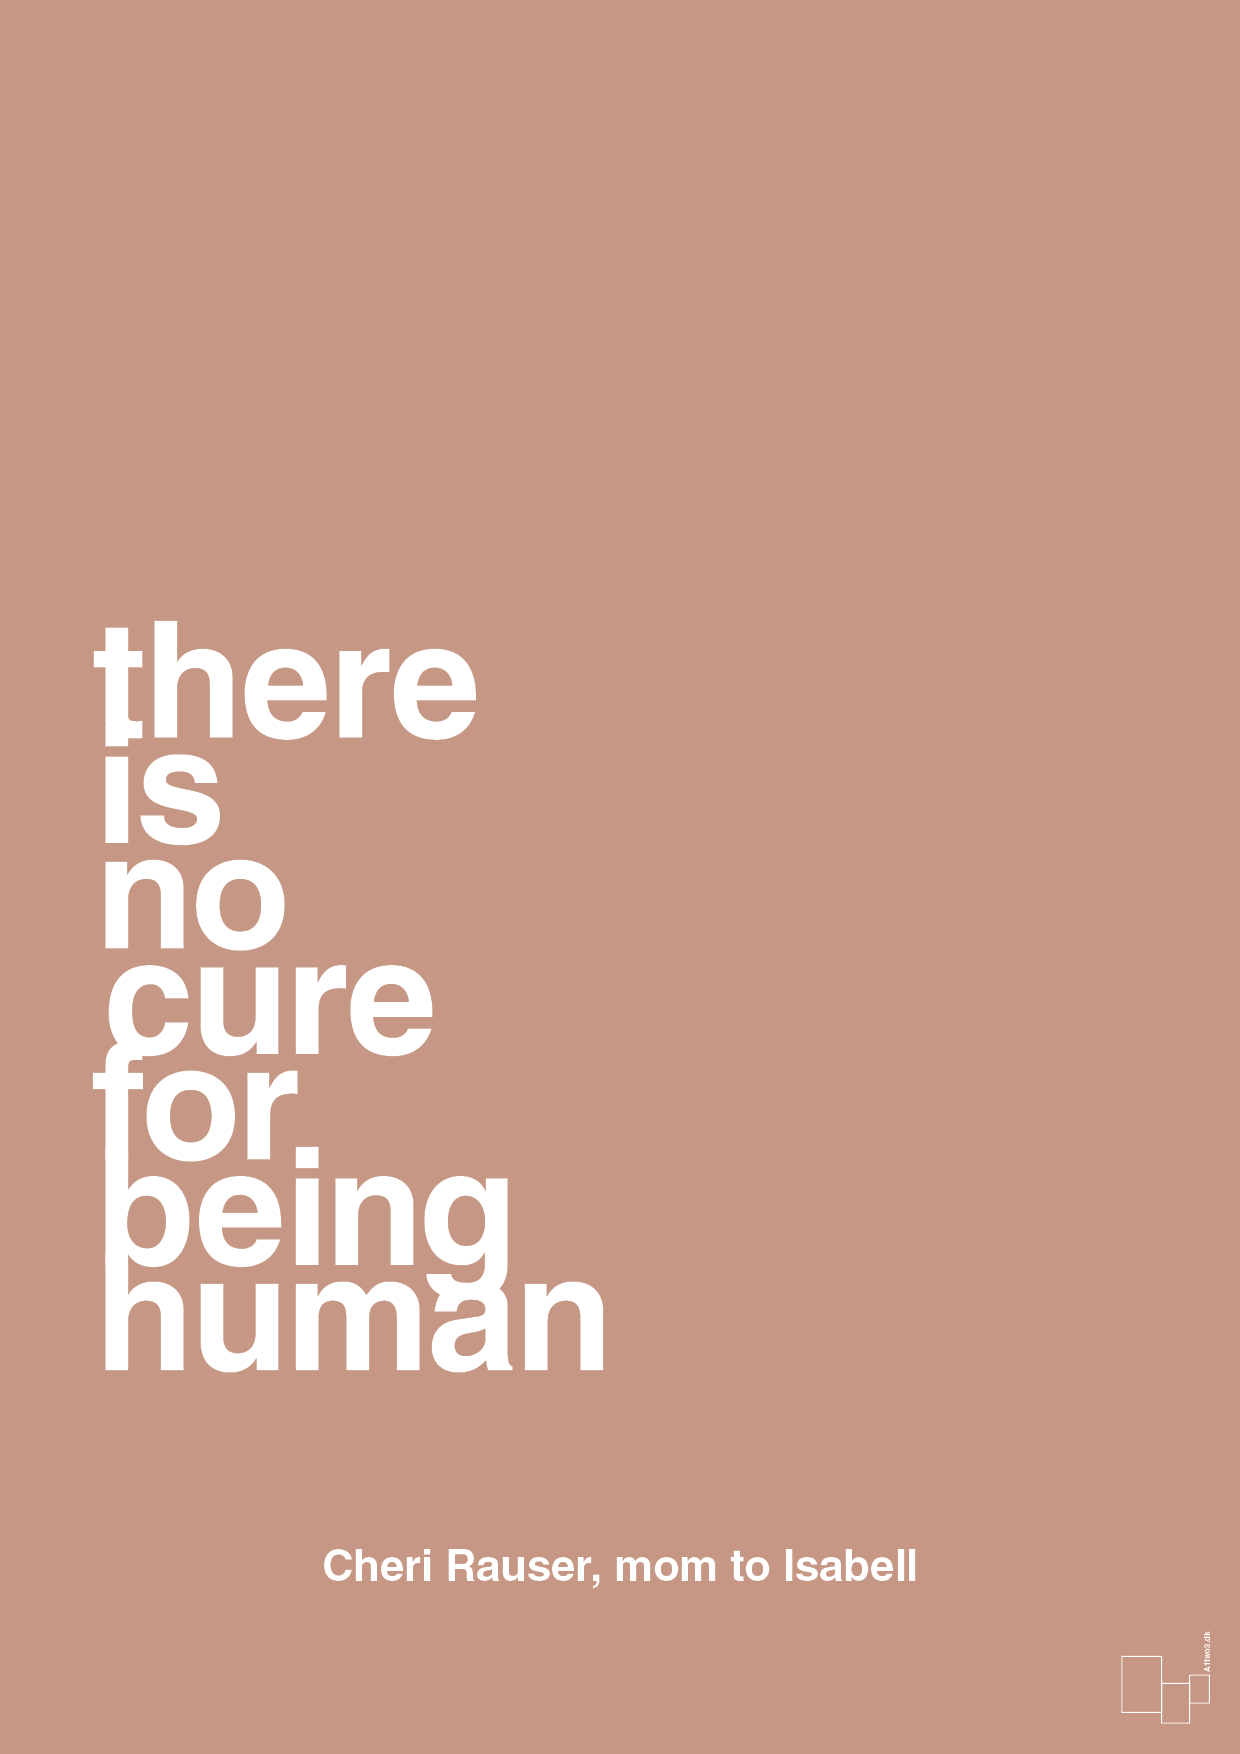 there is no cure for being human - Plakat med Samfund i Powder